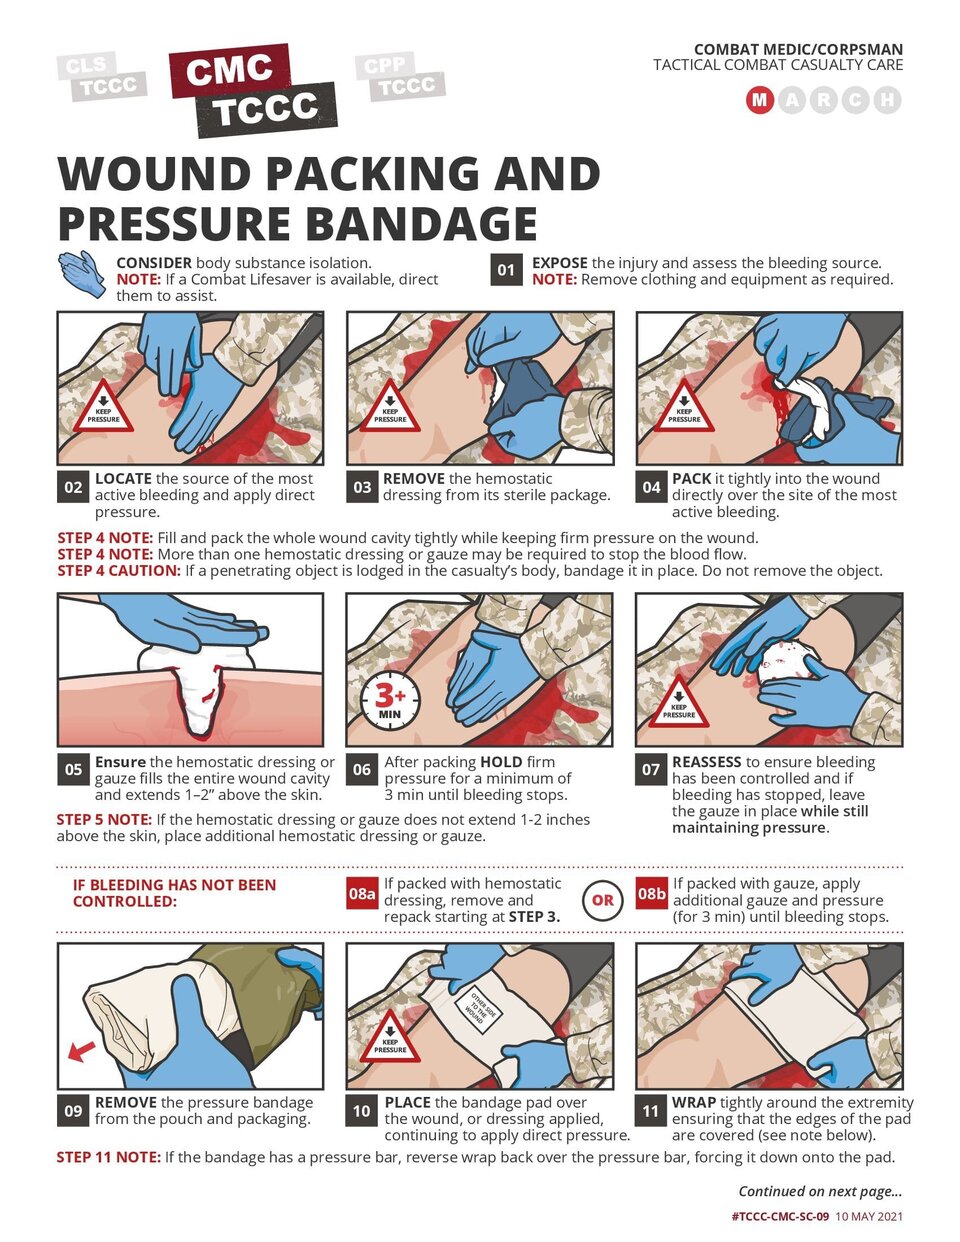 Wound Packing with Hemostatic Gauze and Pressure Bandage